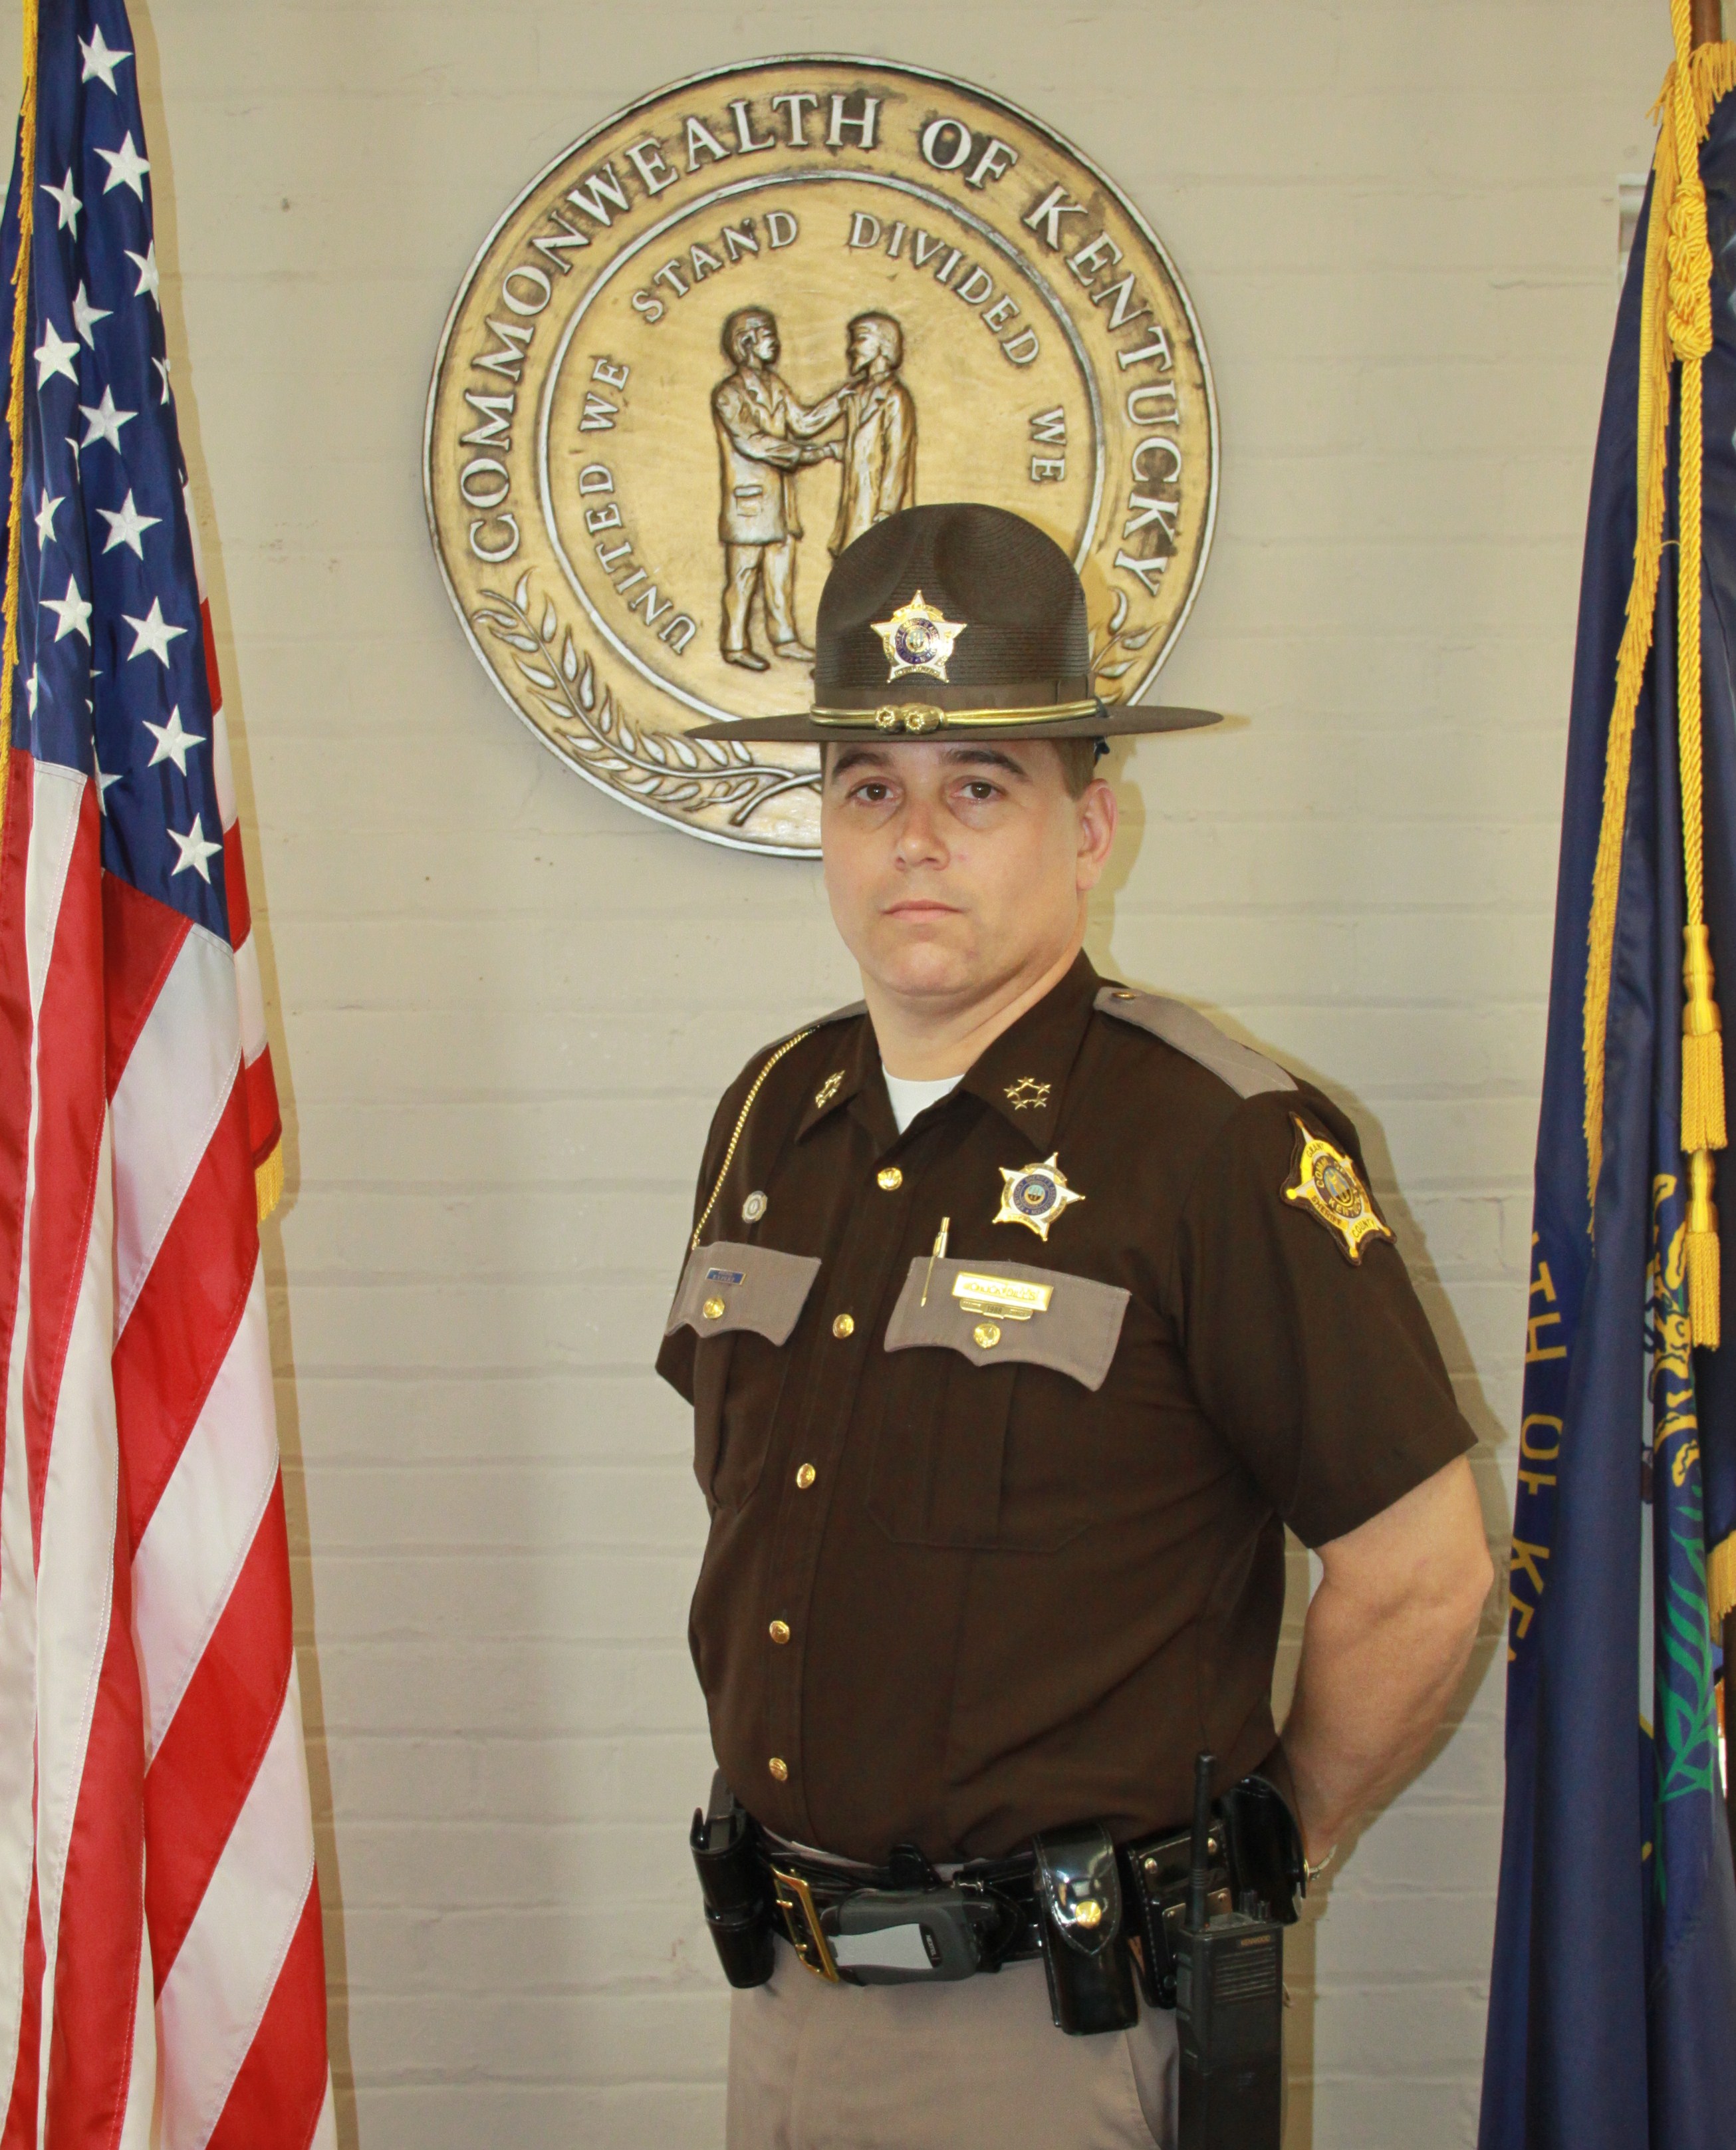 Meet the Sheriff – Grant County Sheriff' Office